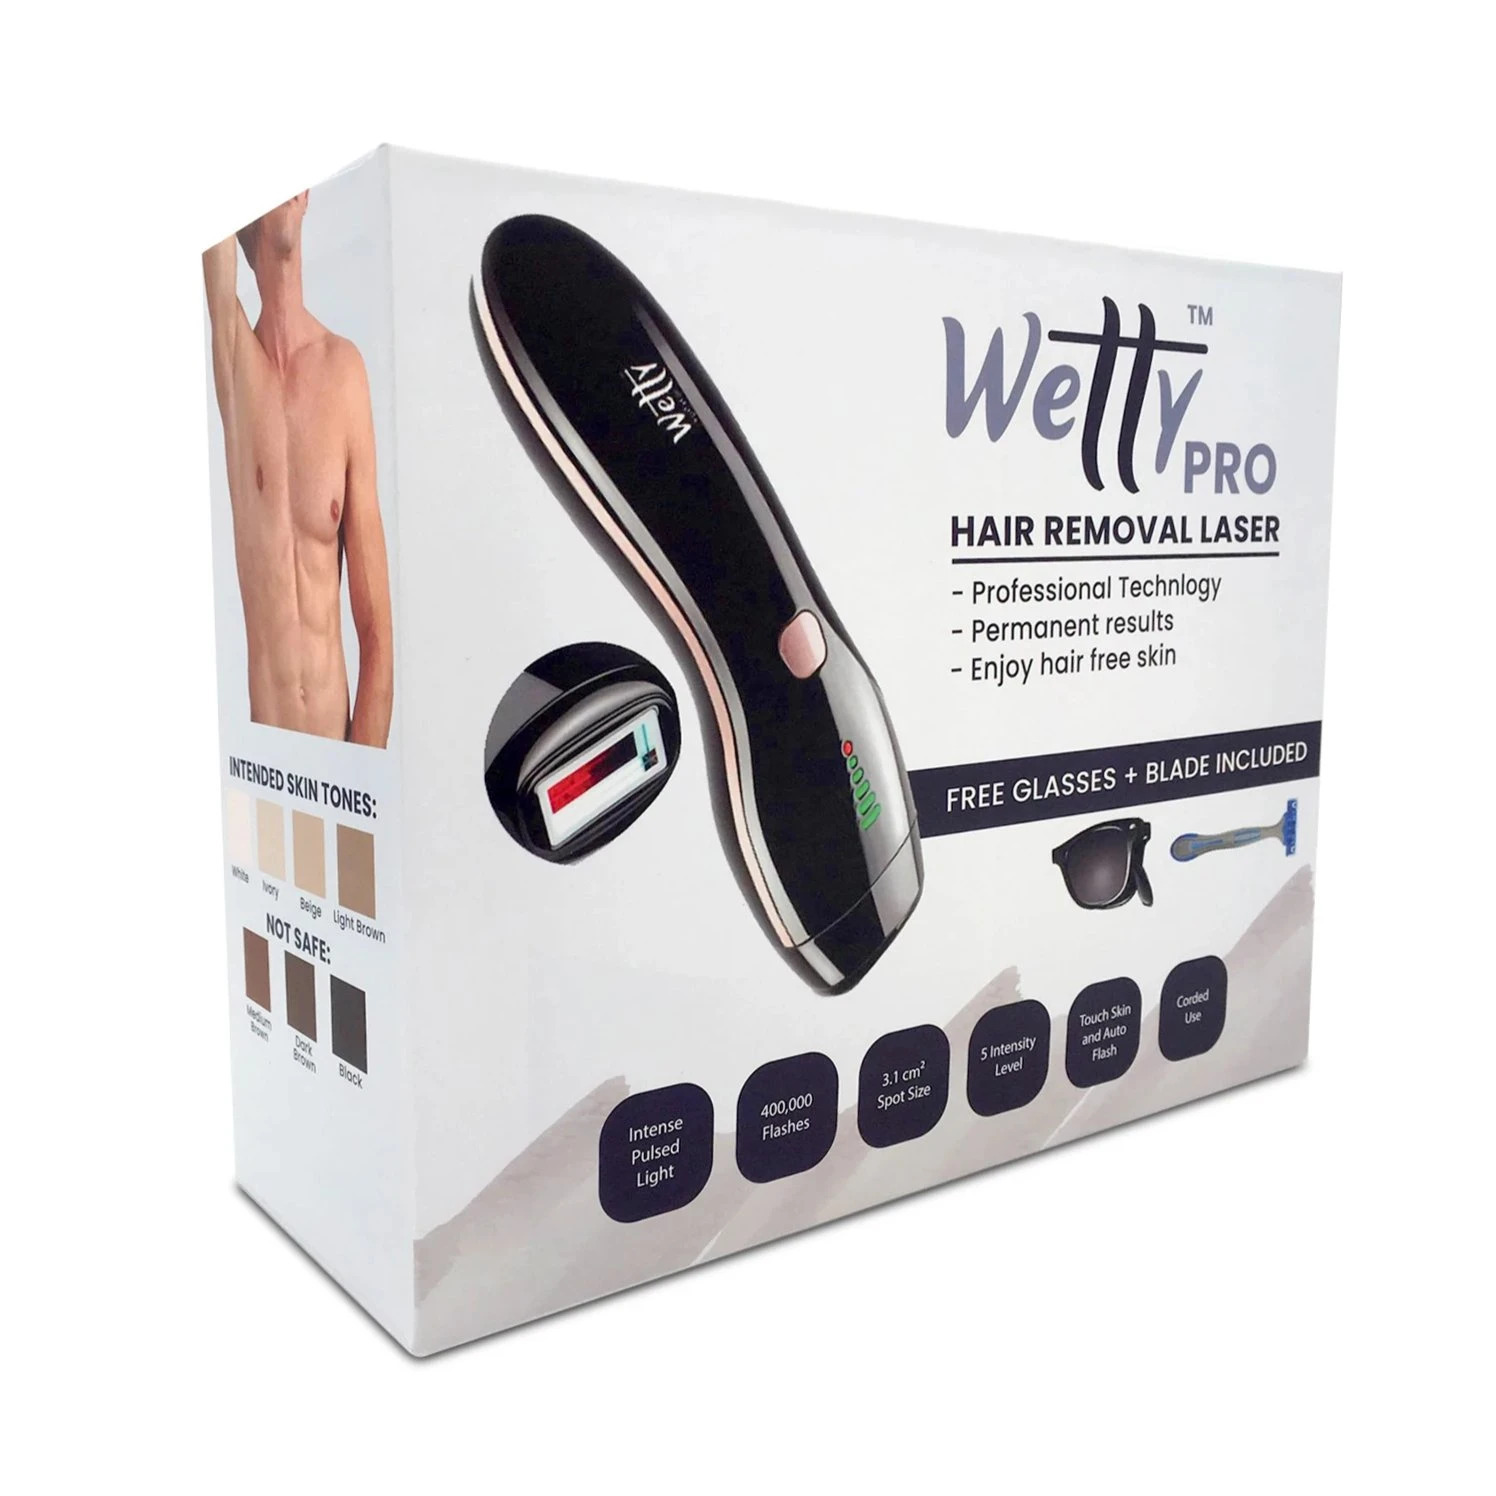 Pro Hair Removal Device by Wetty | BETTER MAN®